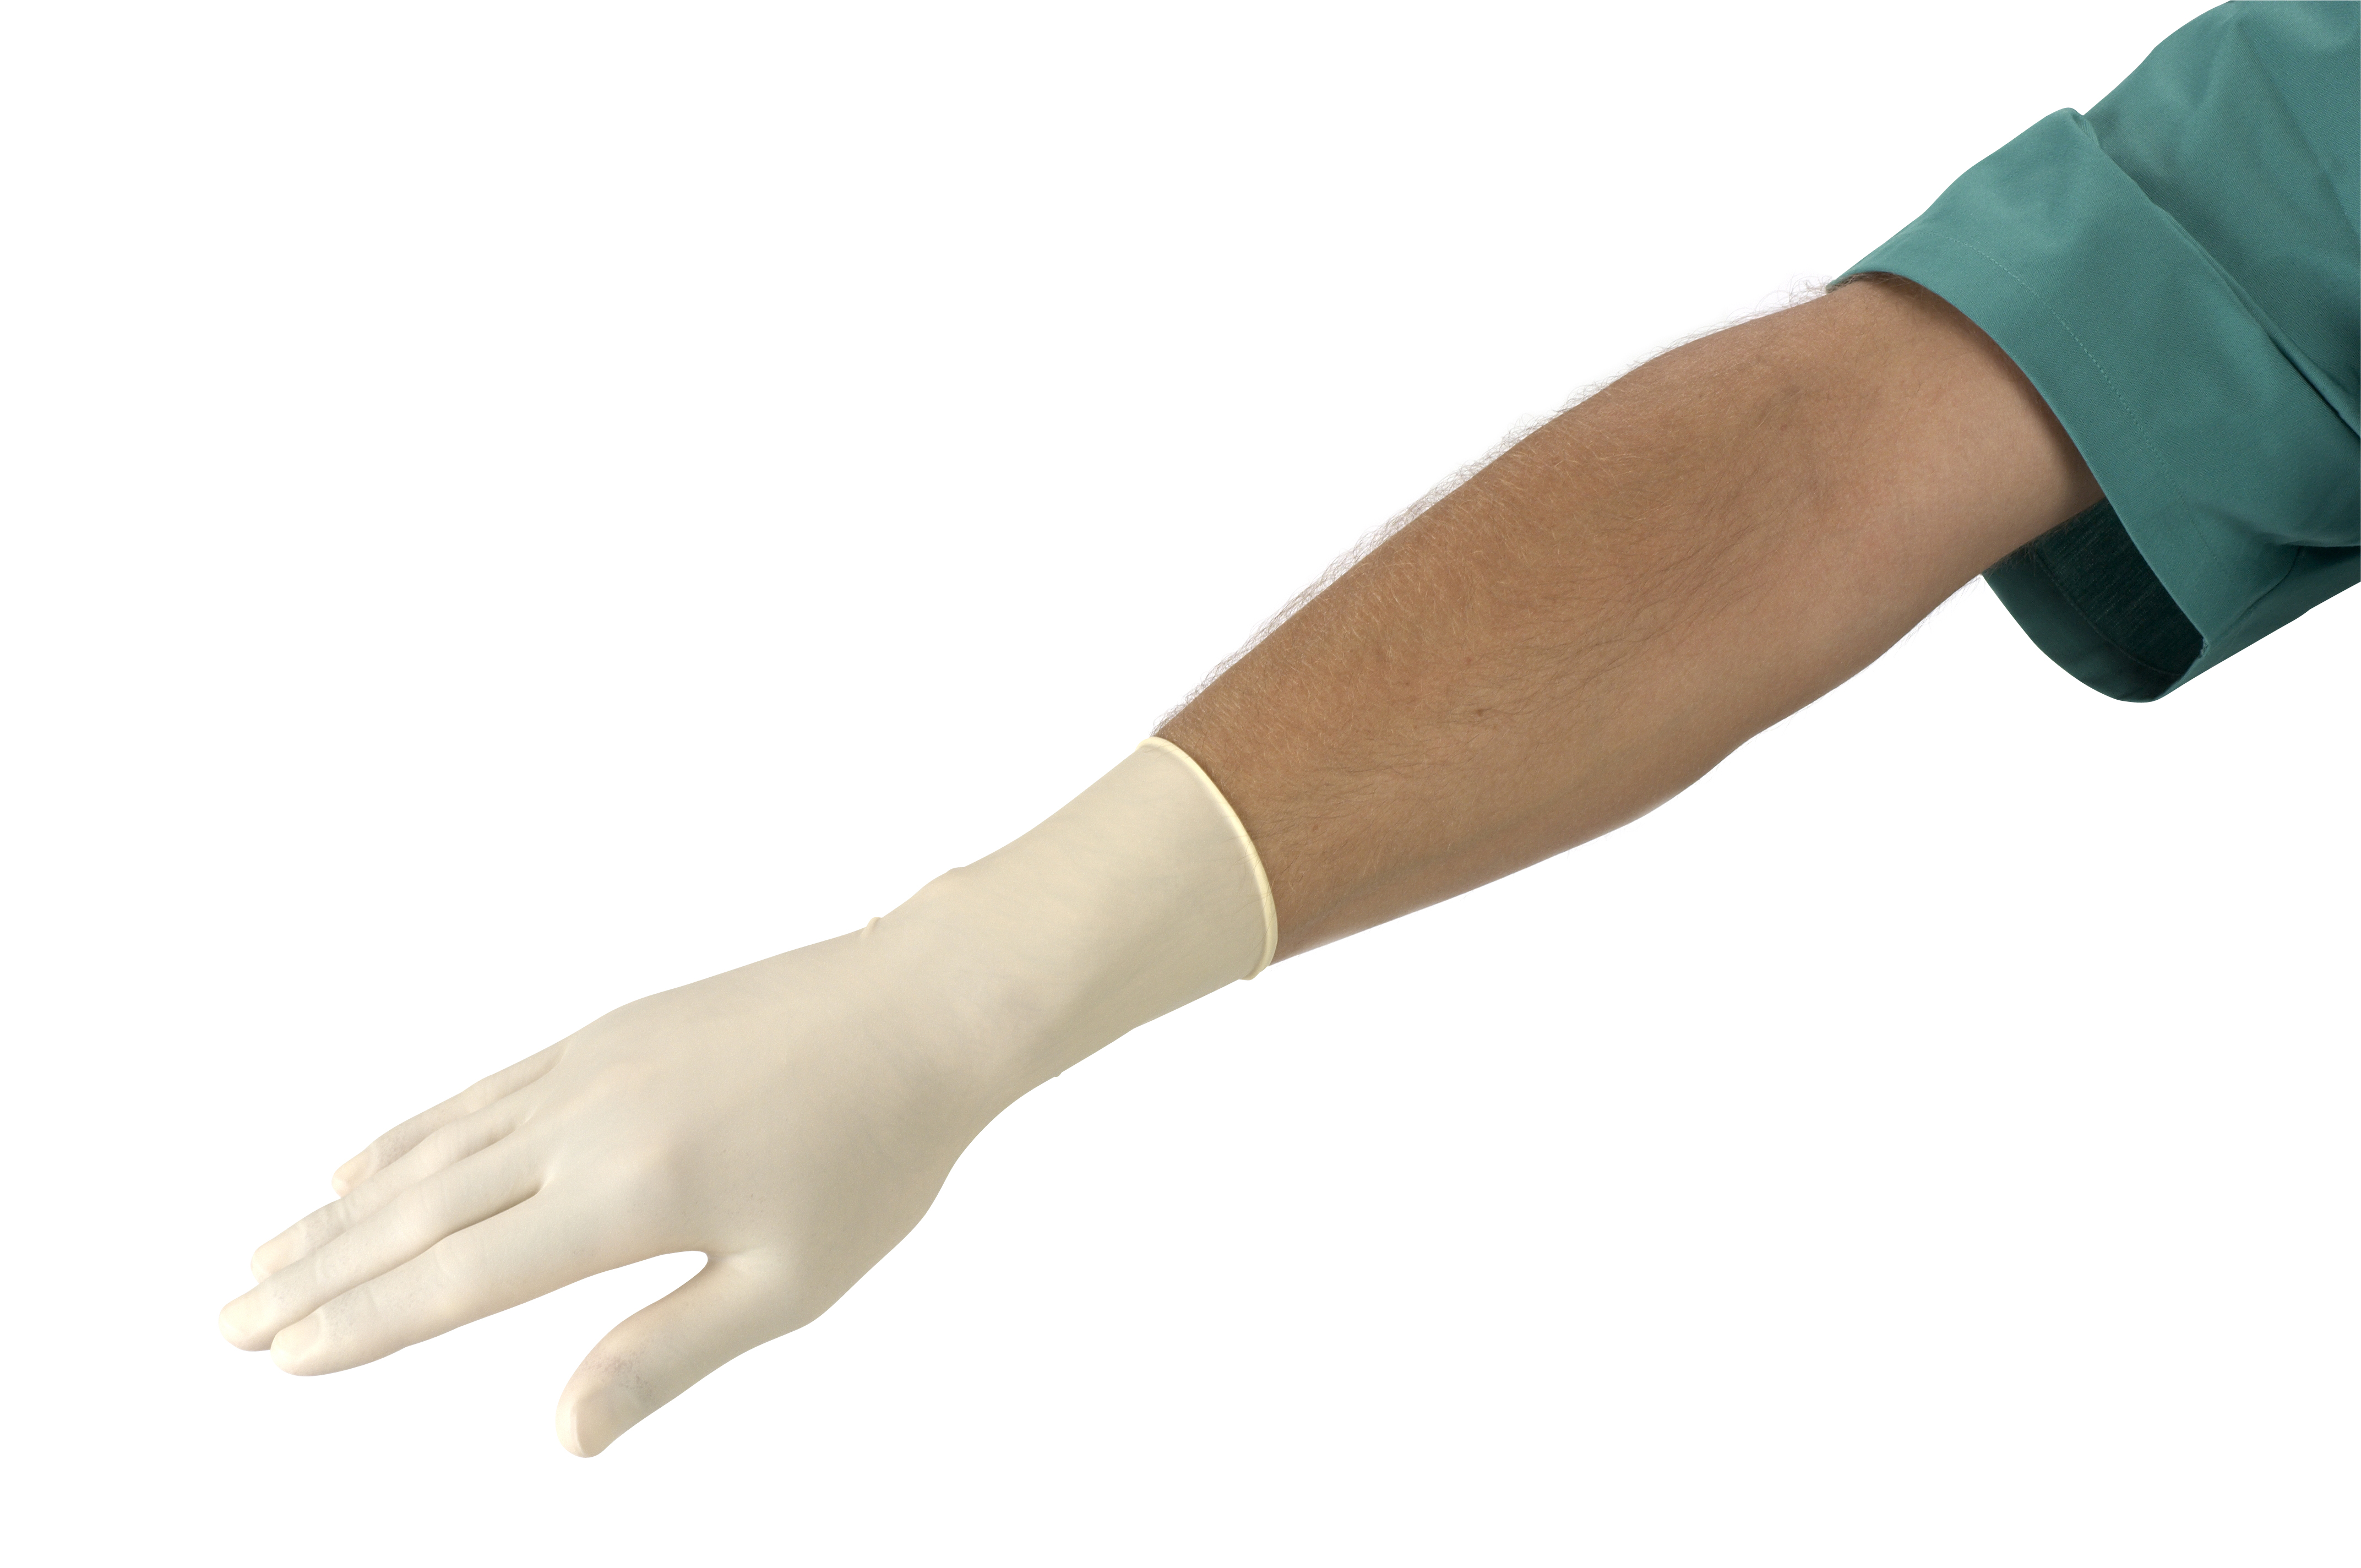 US -KRUTEX surgical gloves PF size 9.0, 50/pk